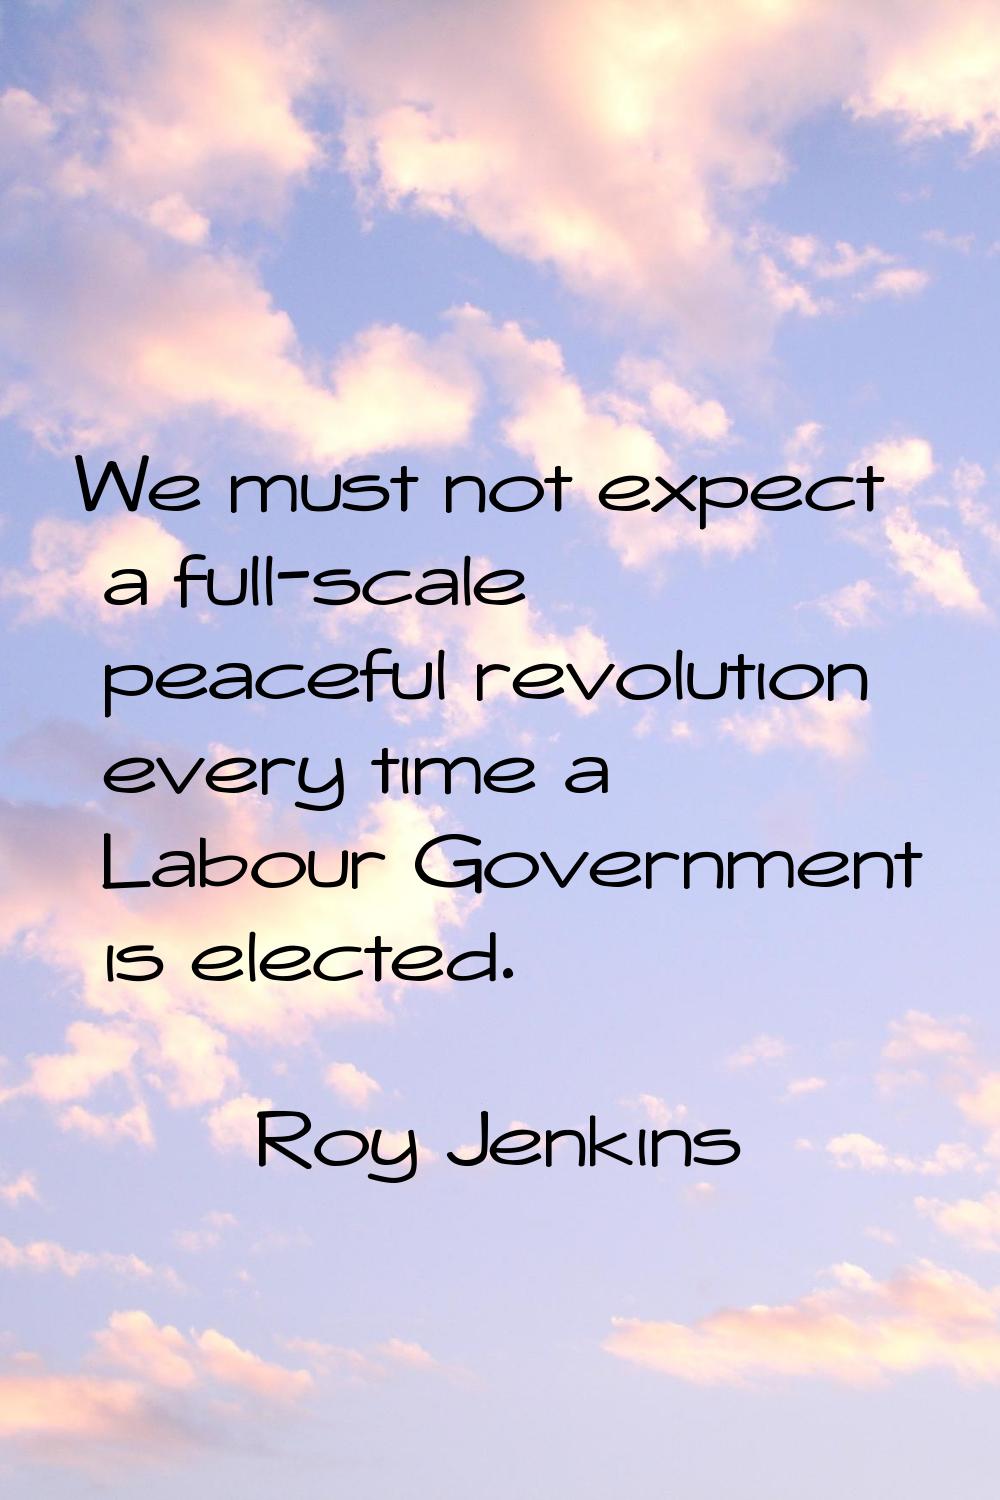 We must not expect a full-scale peaceful revolution every time a Labour Government is elected.